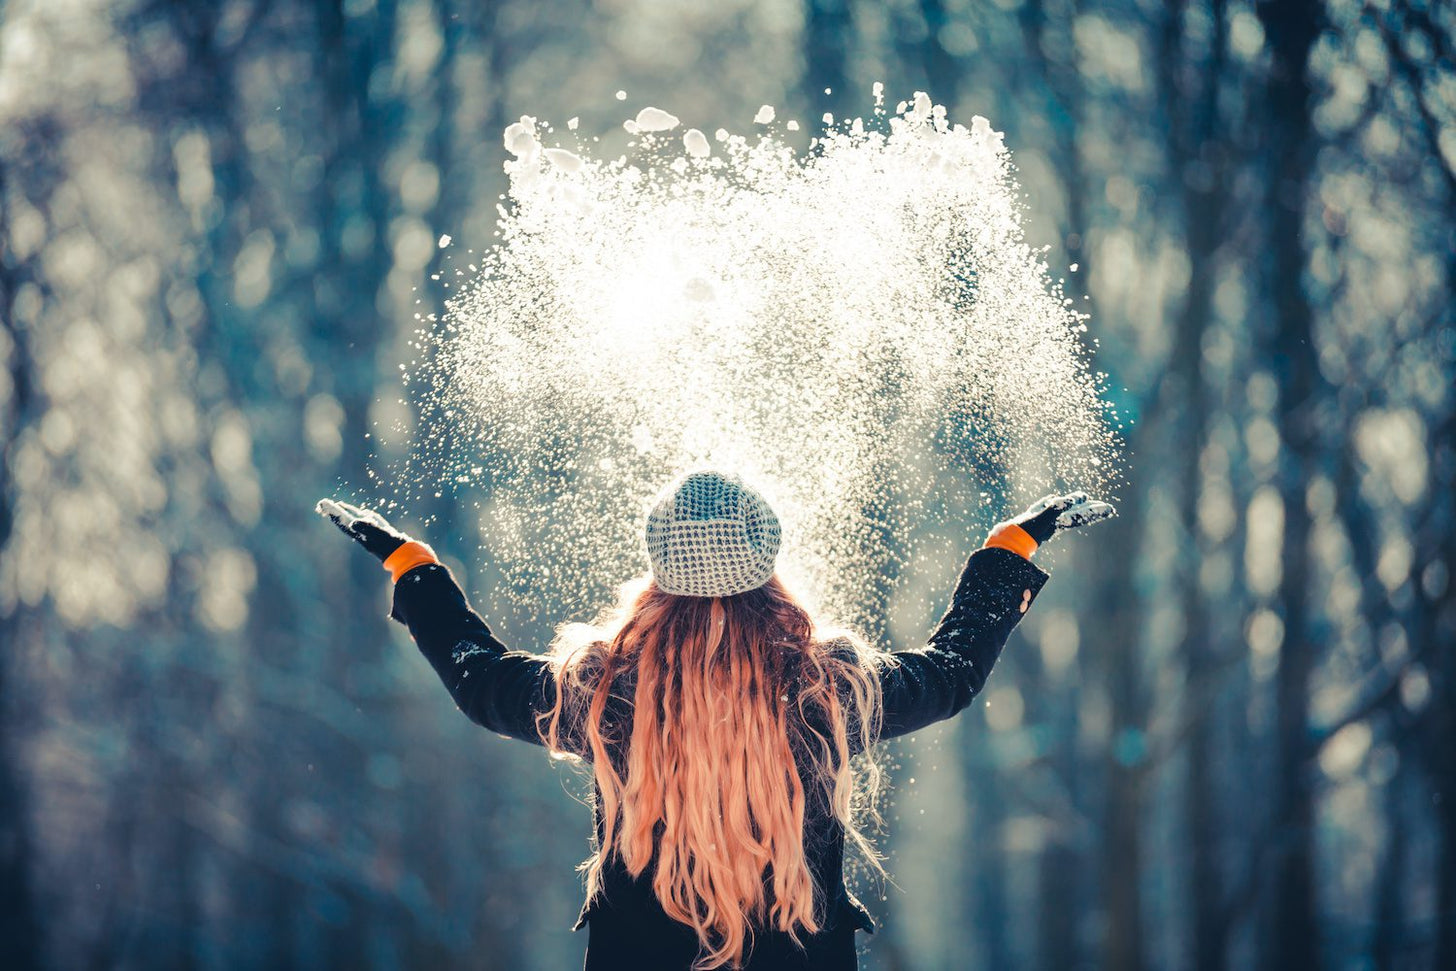 A woman with mittens an a hat stands outside looking at the trees and throws handfuls of powdery snow into the air